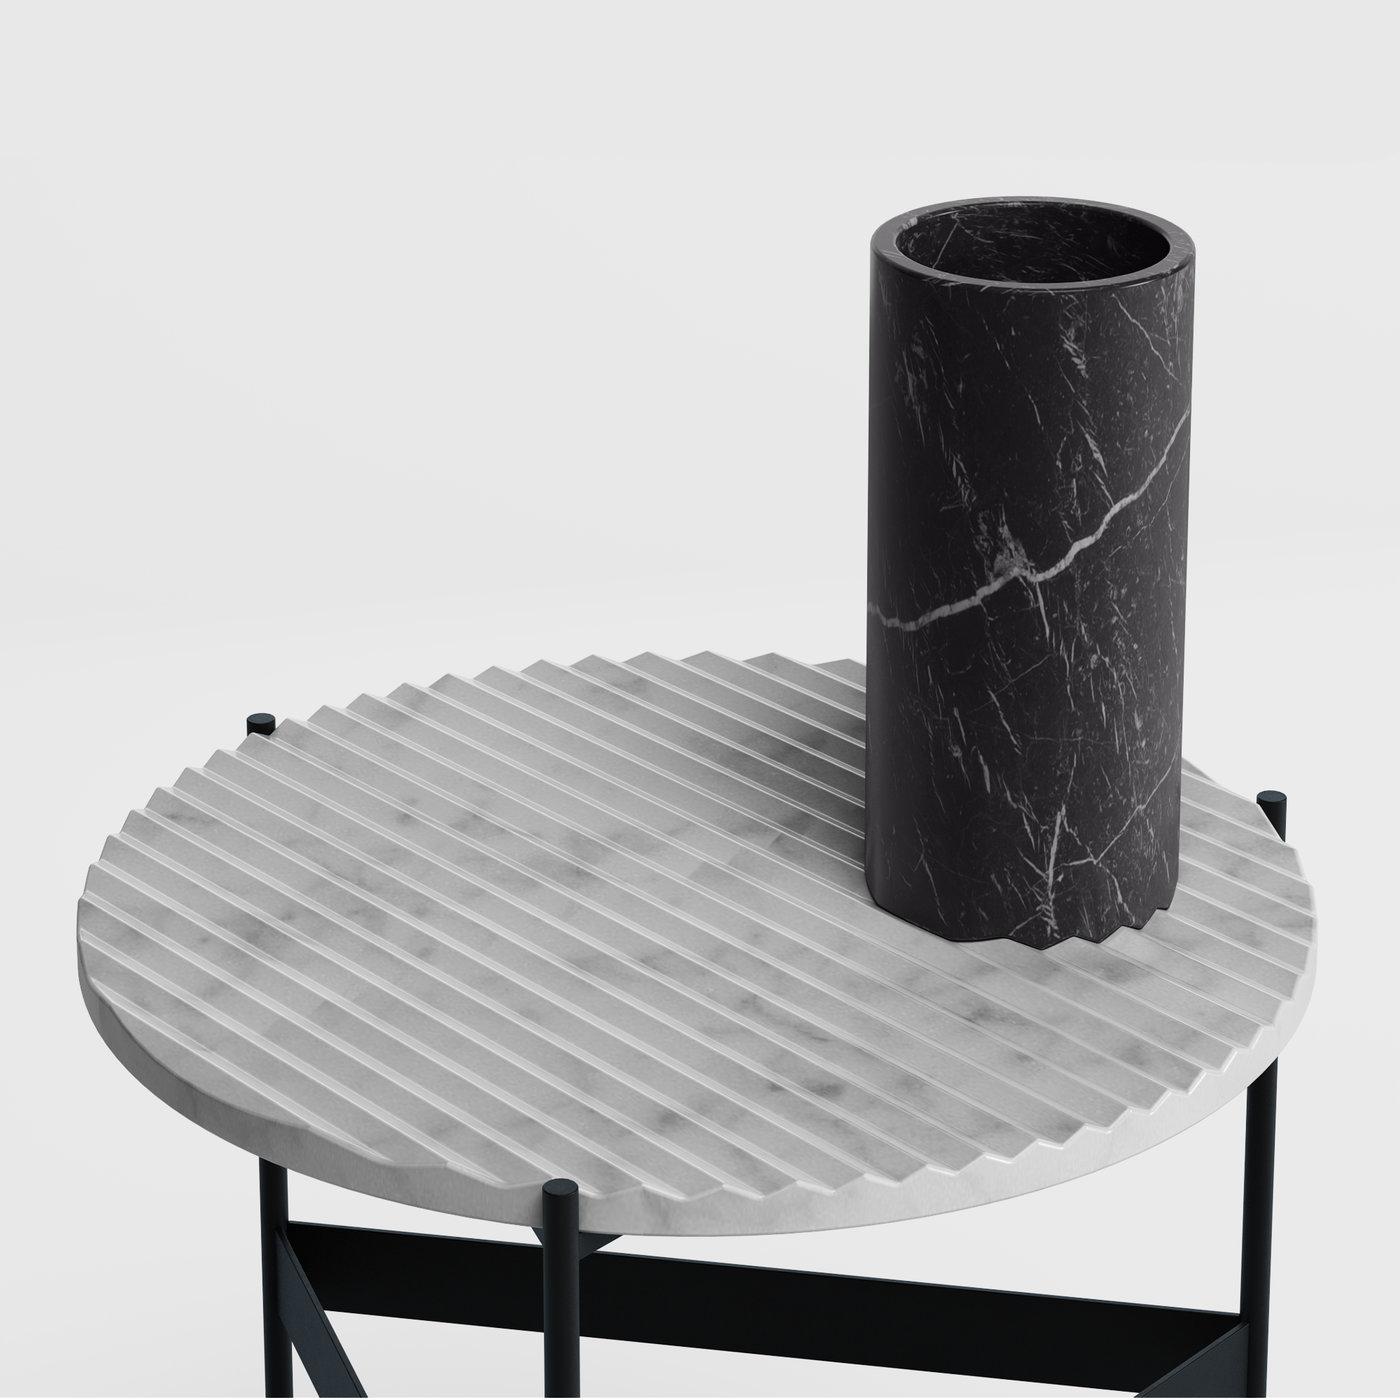 The epitome of contemporary taste, this sculptural vase fashioned of prized black Marquina marble showcases a sleek zig-zagged base designed to interlock with its counterpart marking the coffee tables from the ZigZag series. Stunning as a standalone